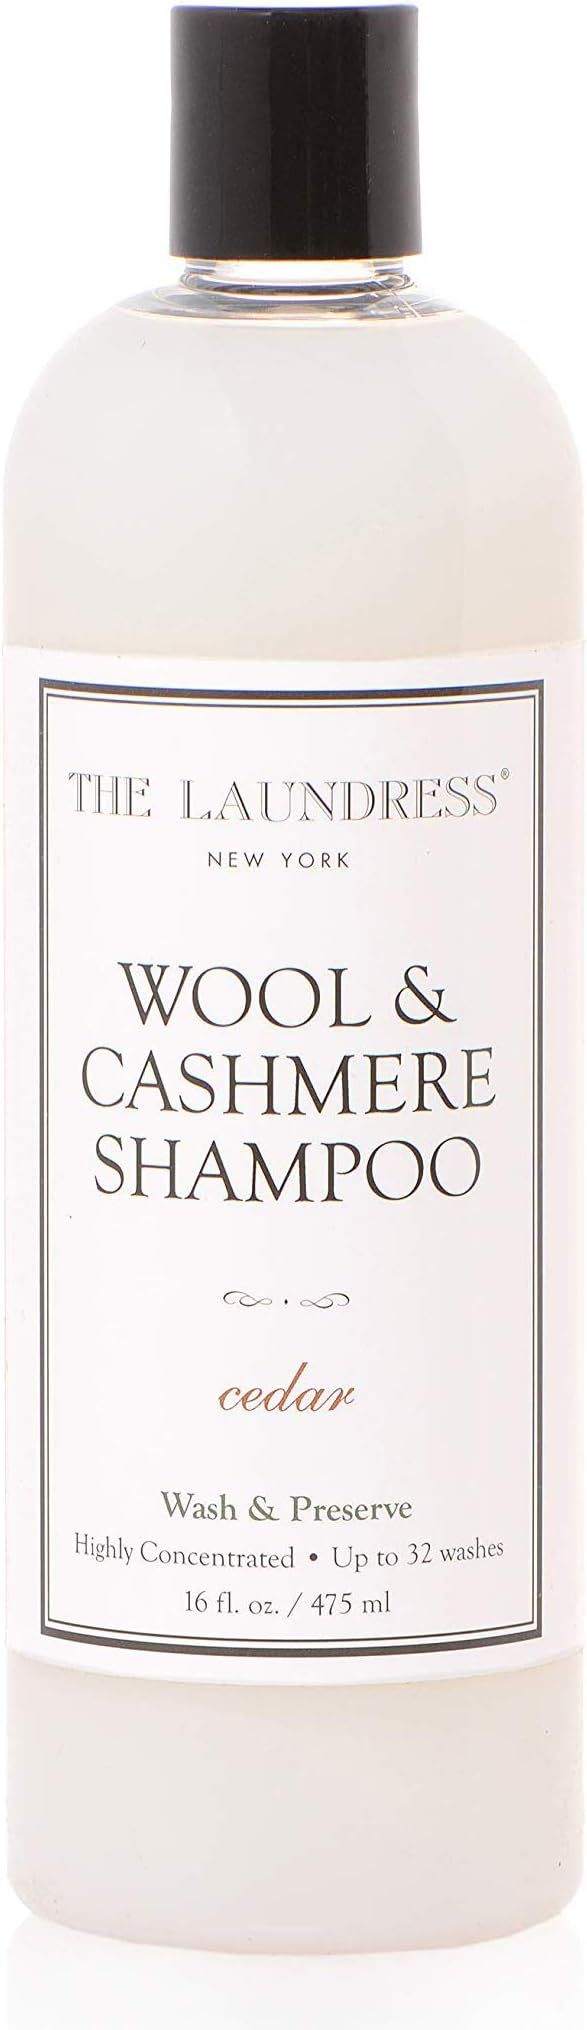 The Laundress New York - Wool & Cashmere Shampoo, Allergen-Free, Adds Scent & Removes Odor, Scent... | Amazon (US)